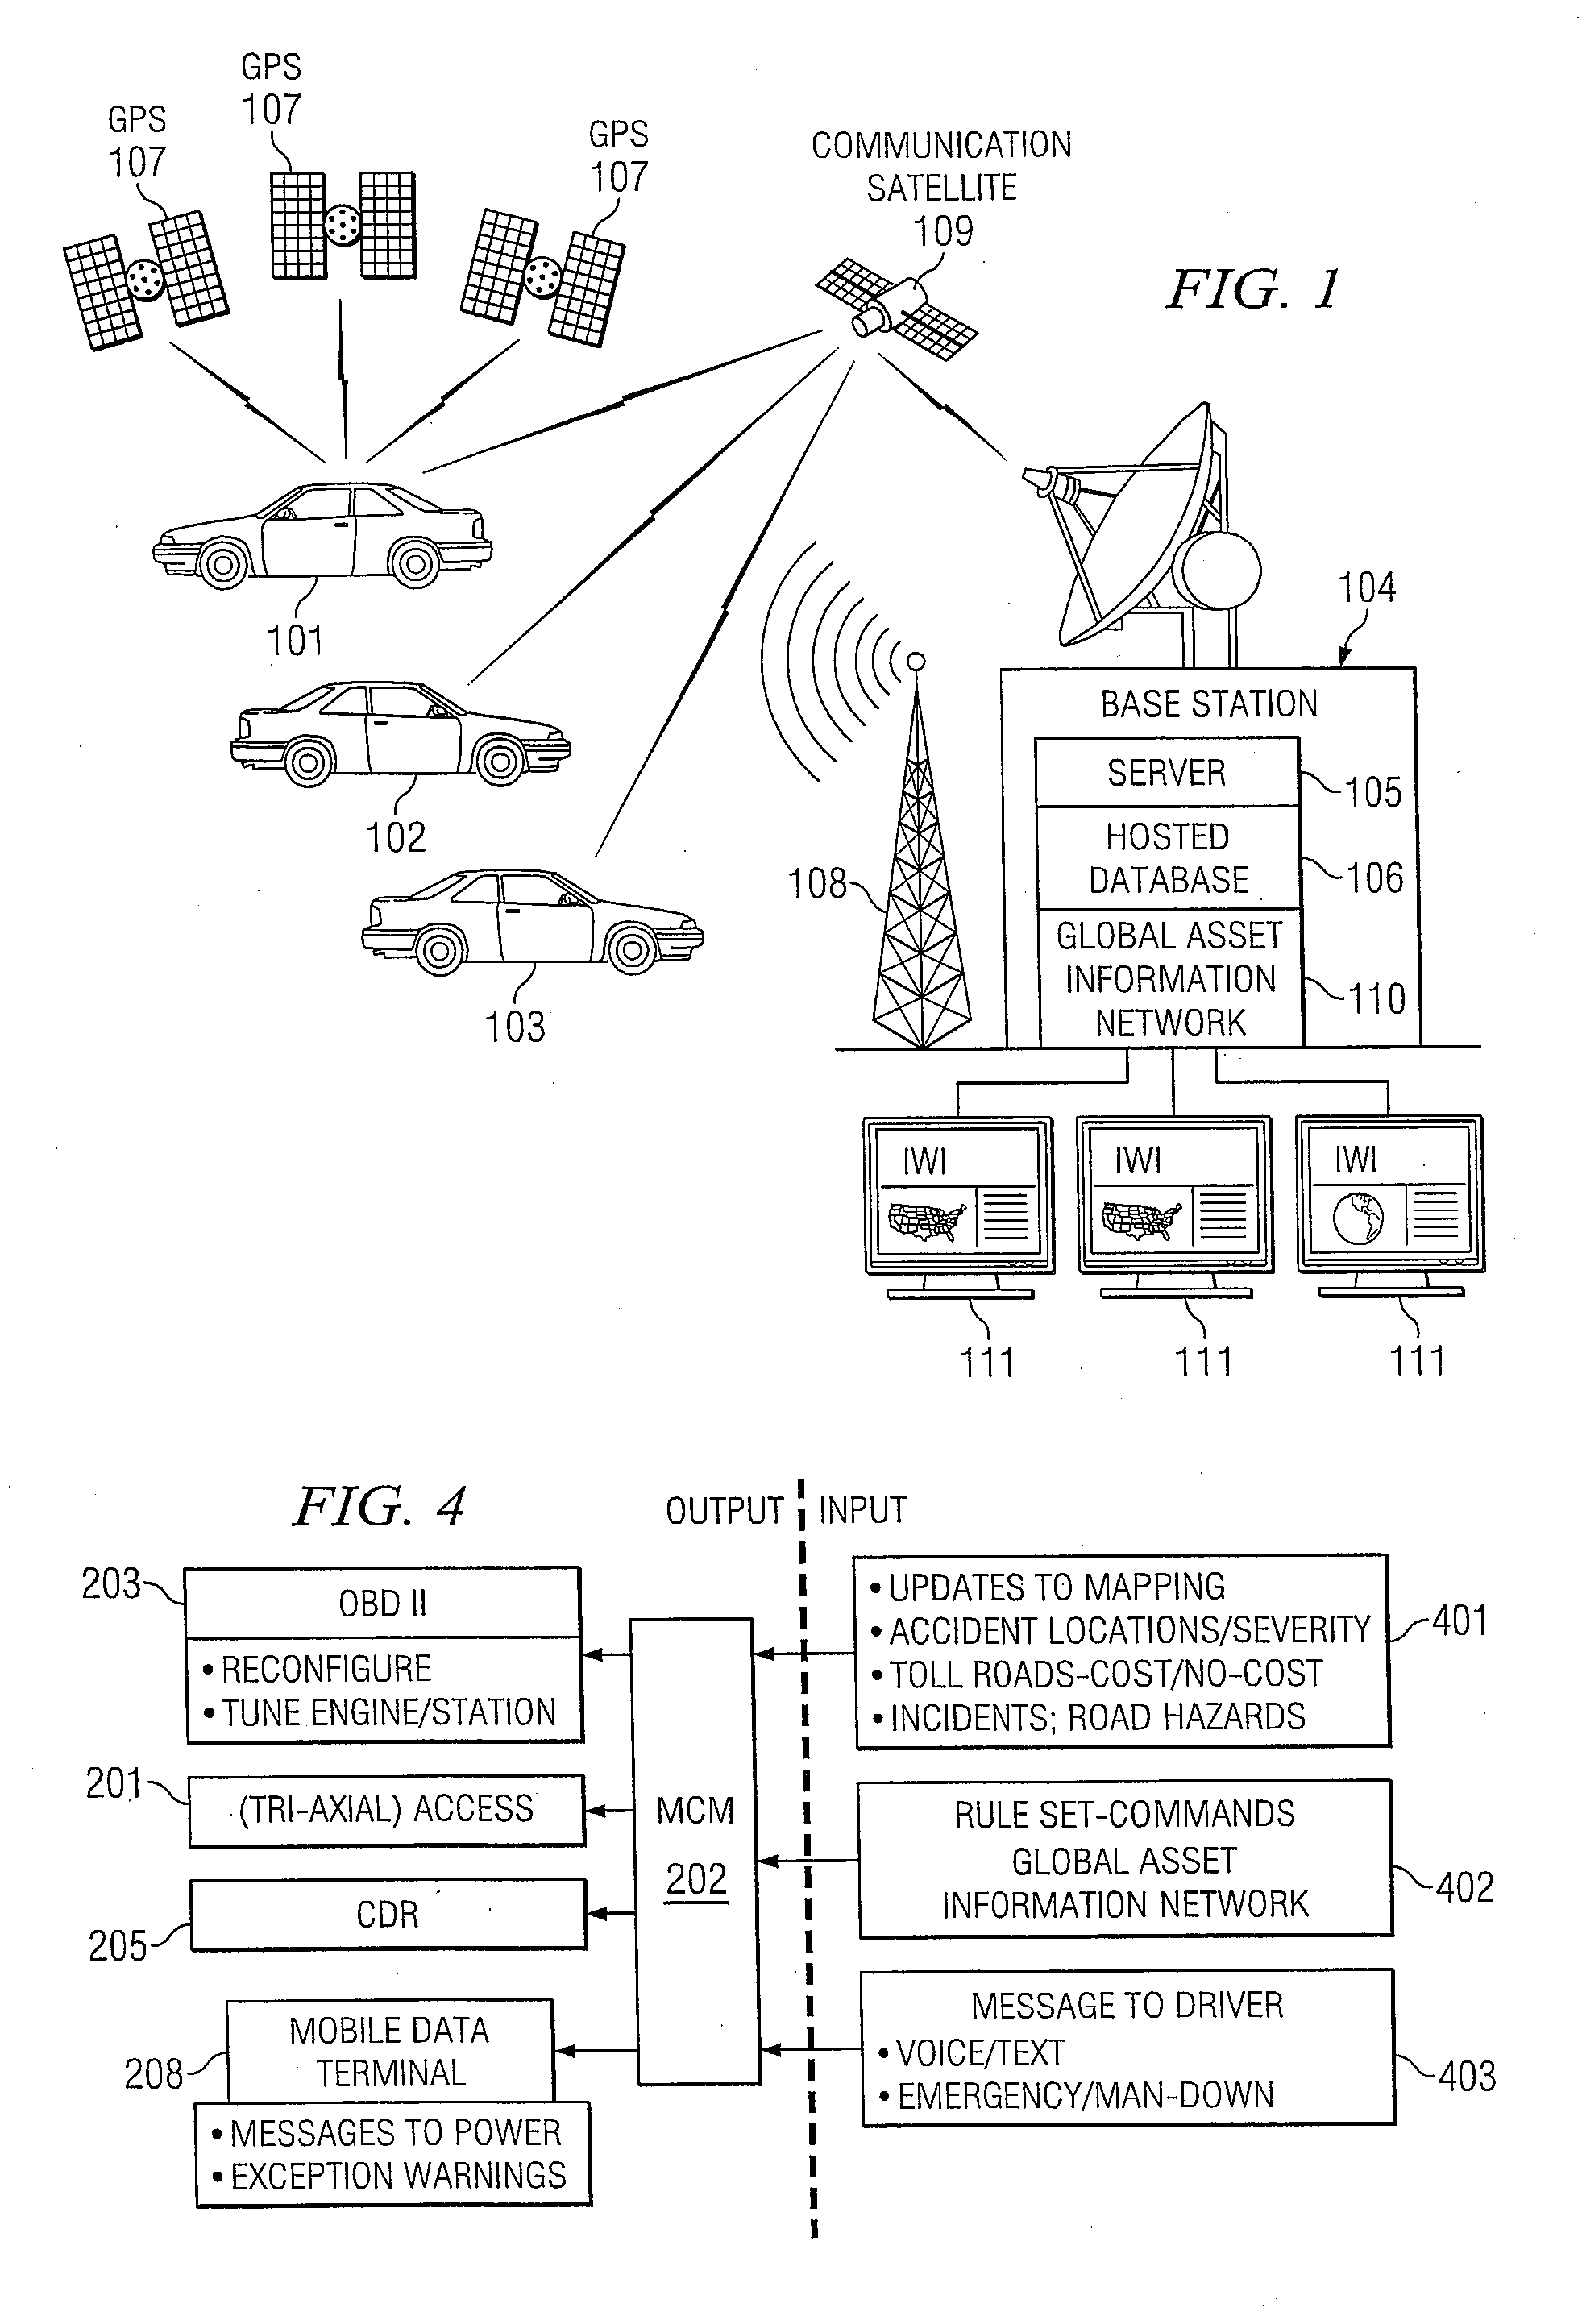 System and Method for Remotely Deactivating a Vehicle